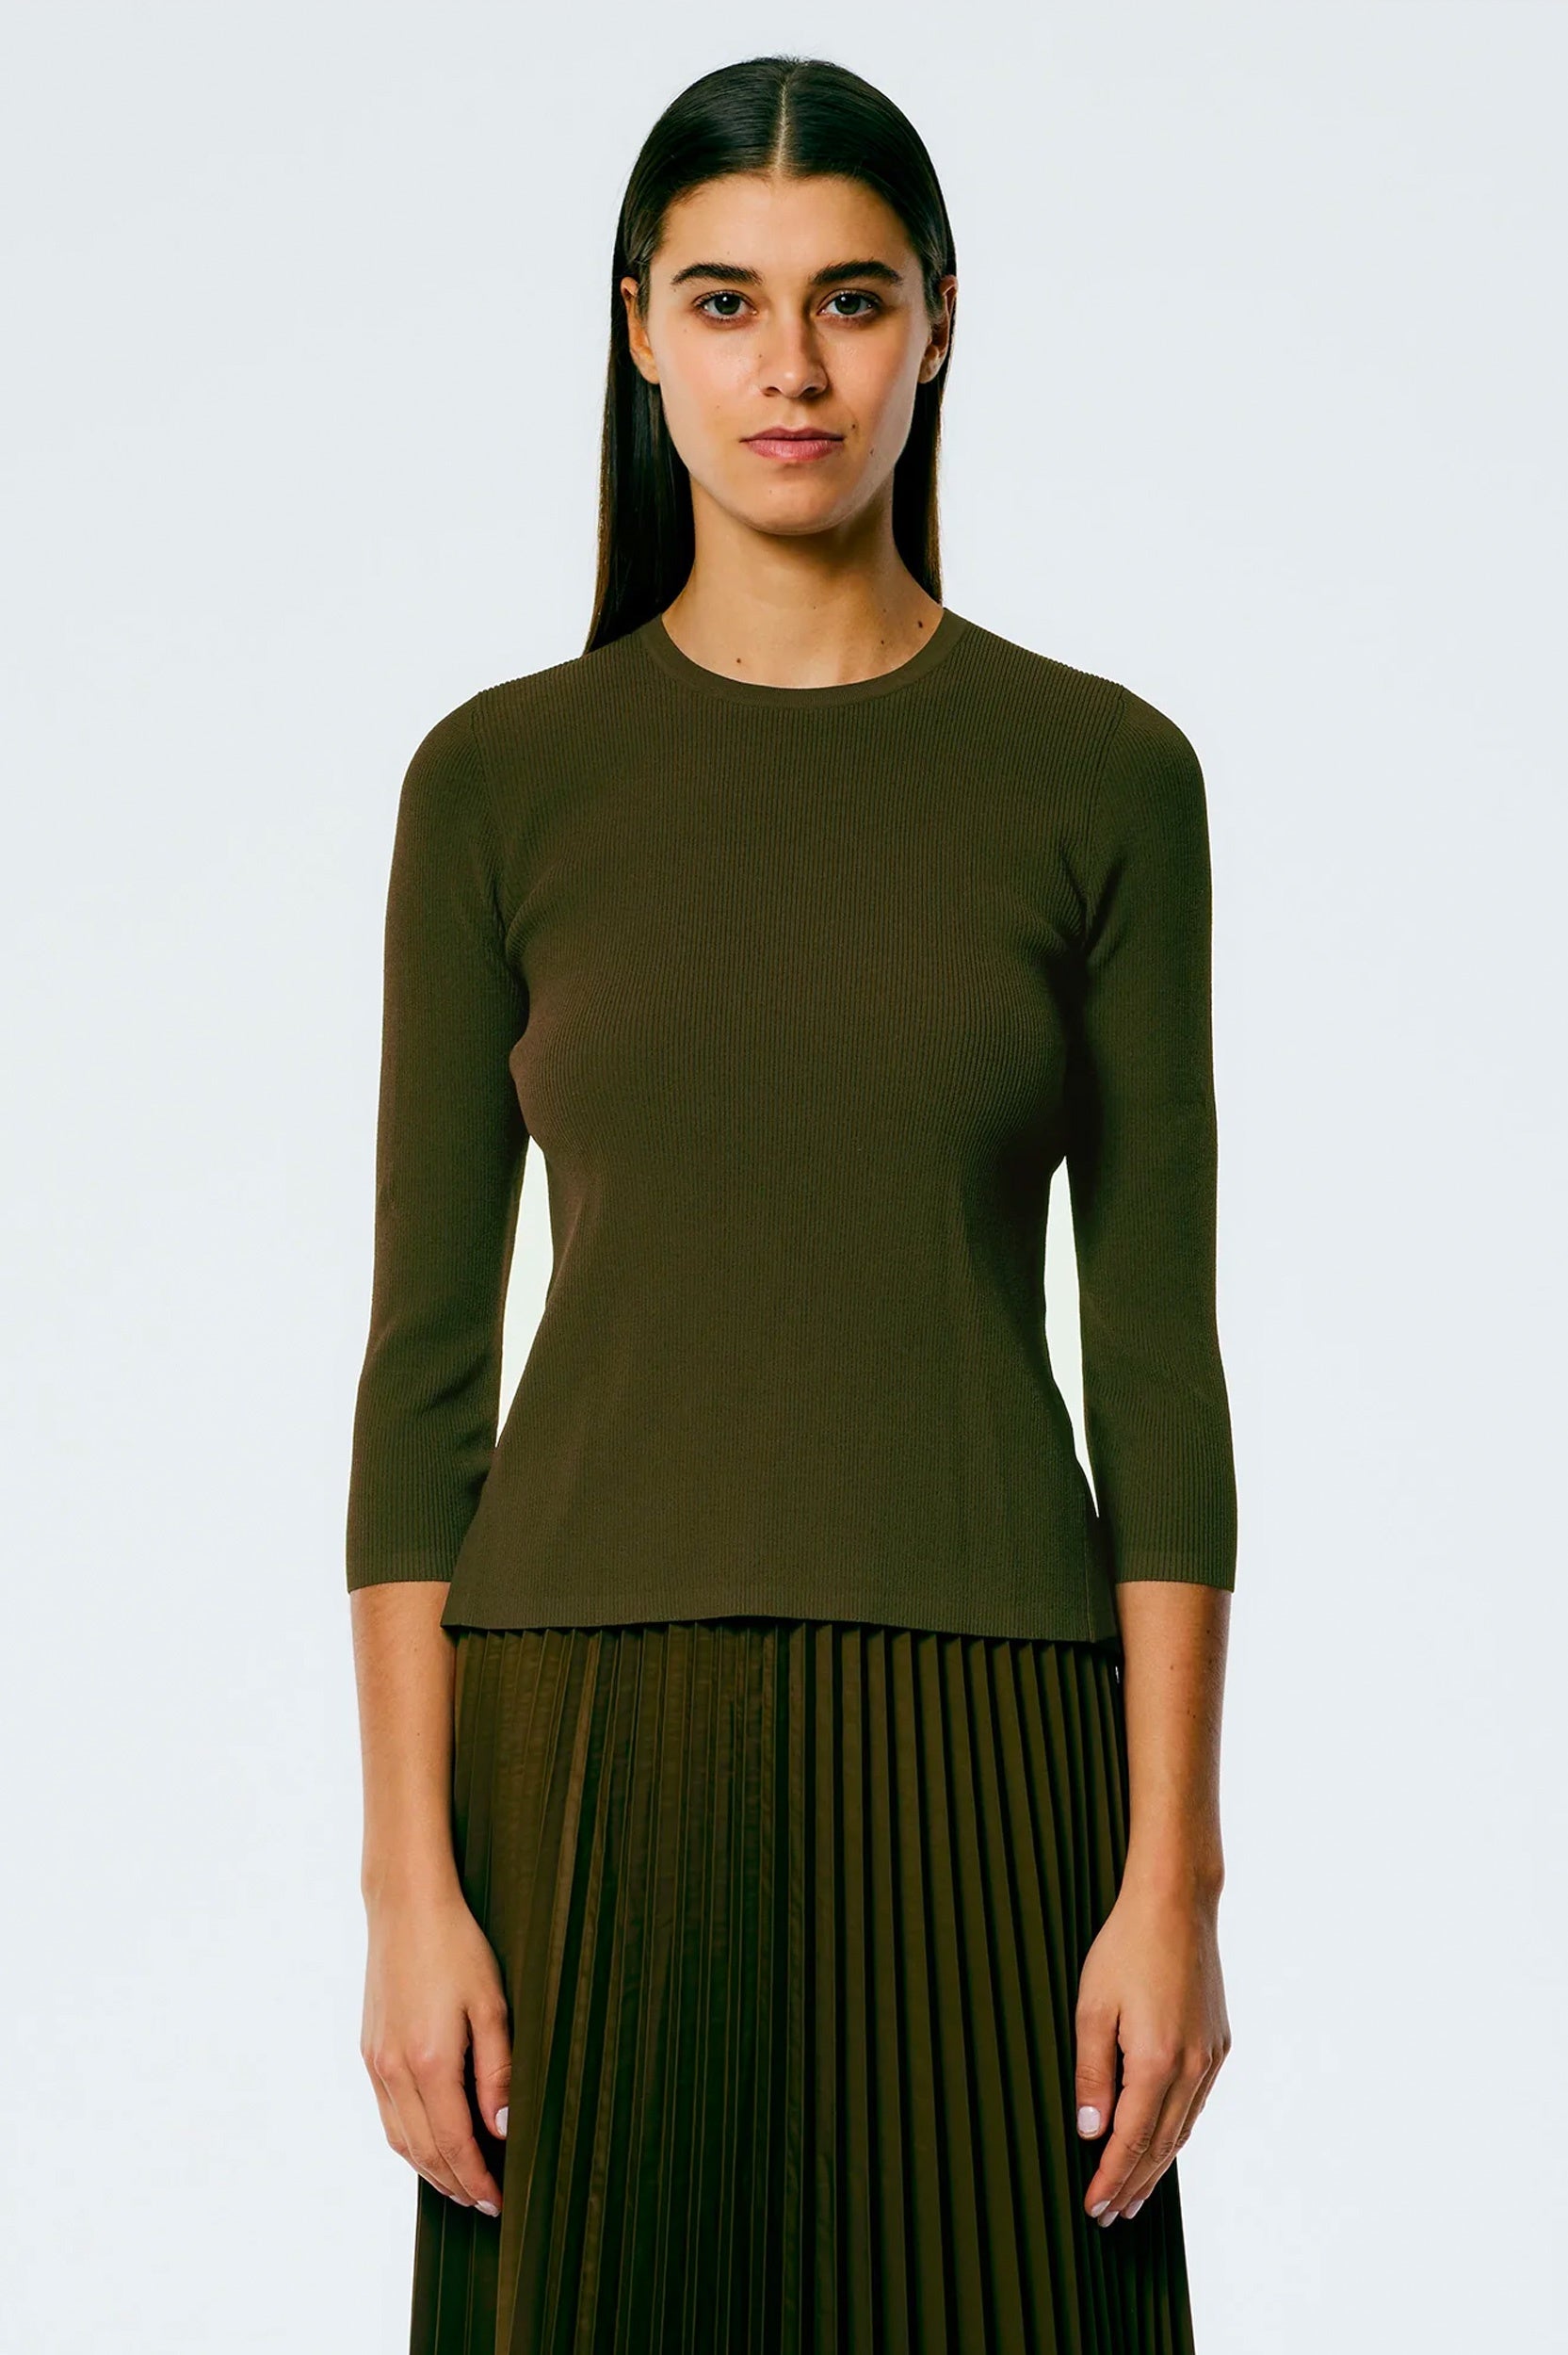 Giselle Openback Stretch Sweater in Wood